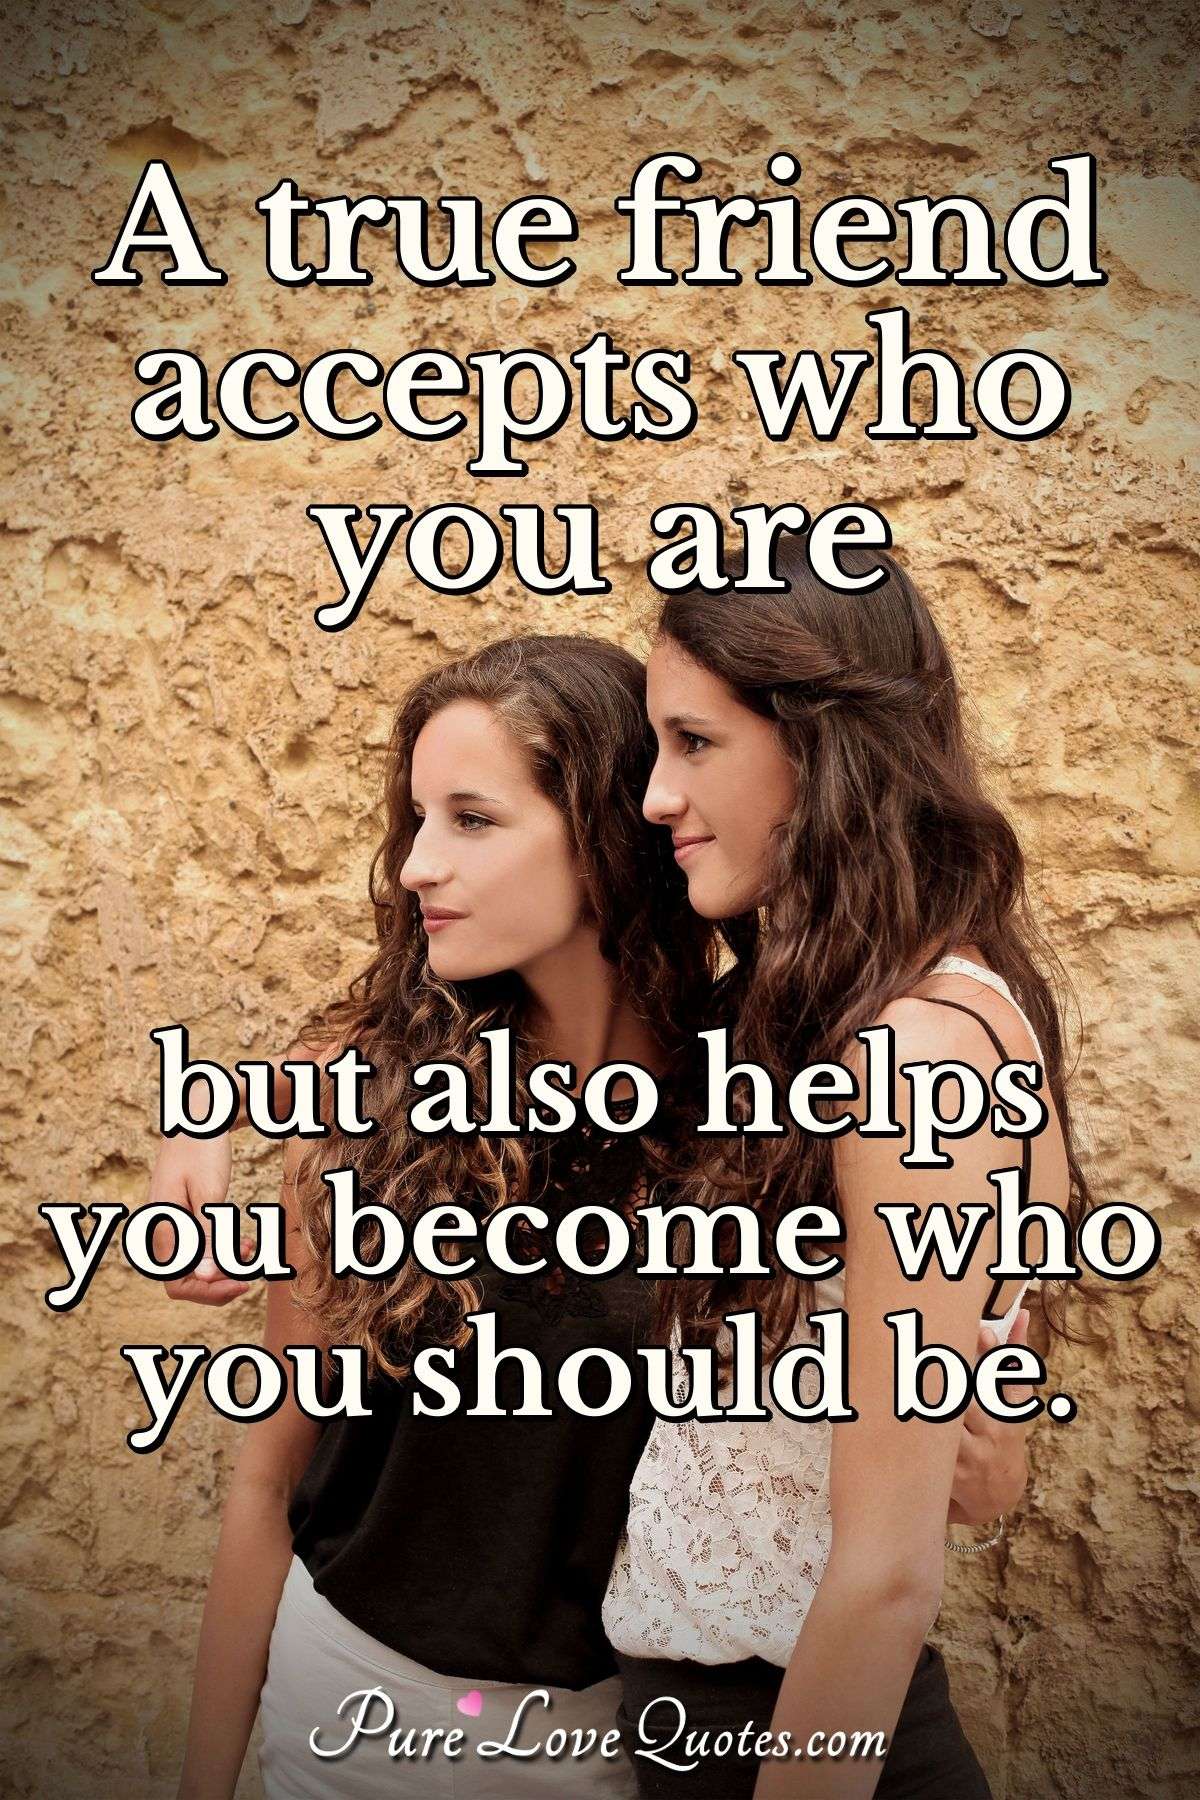 A True Friend Accepts Who You Are But Also Helps You Become Who You Should Be Purelovequotes